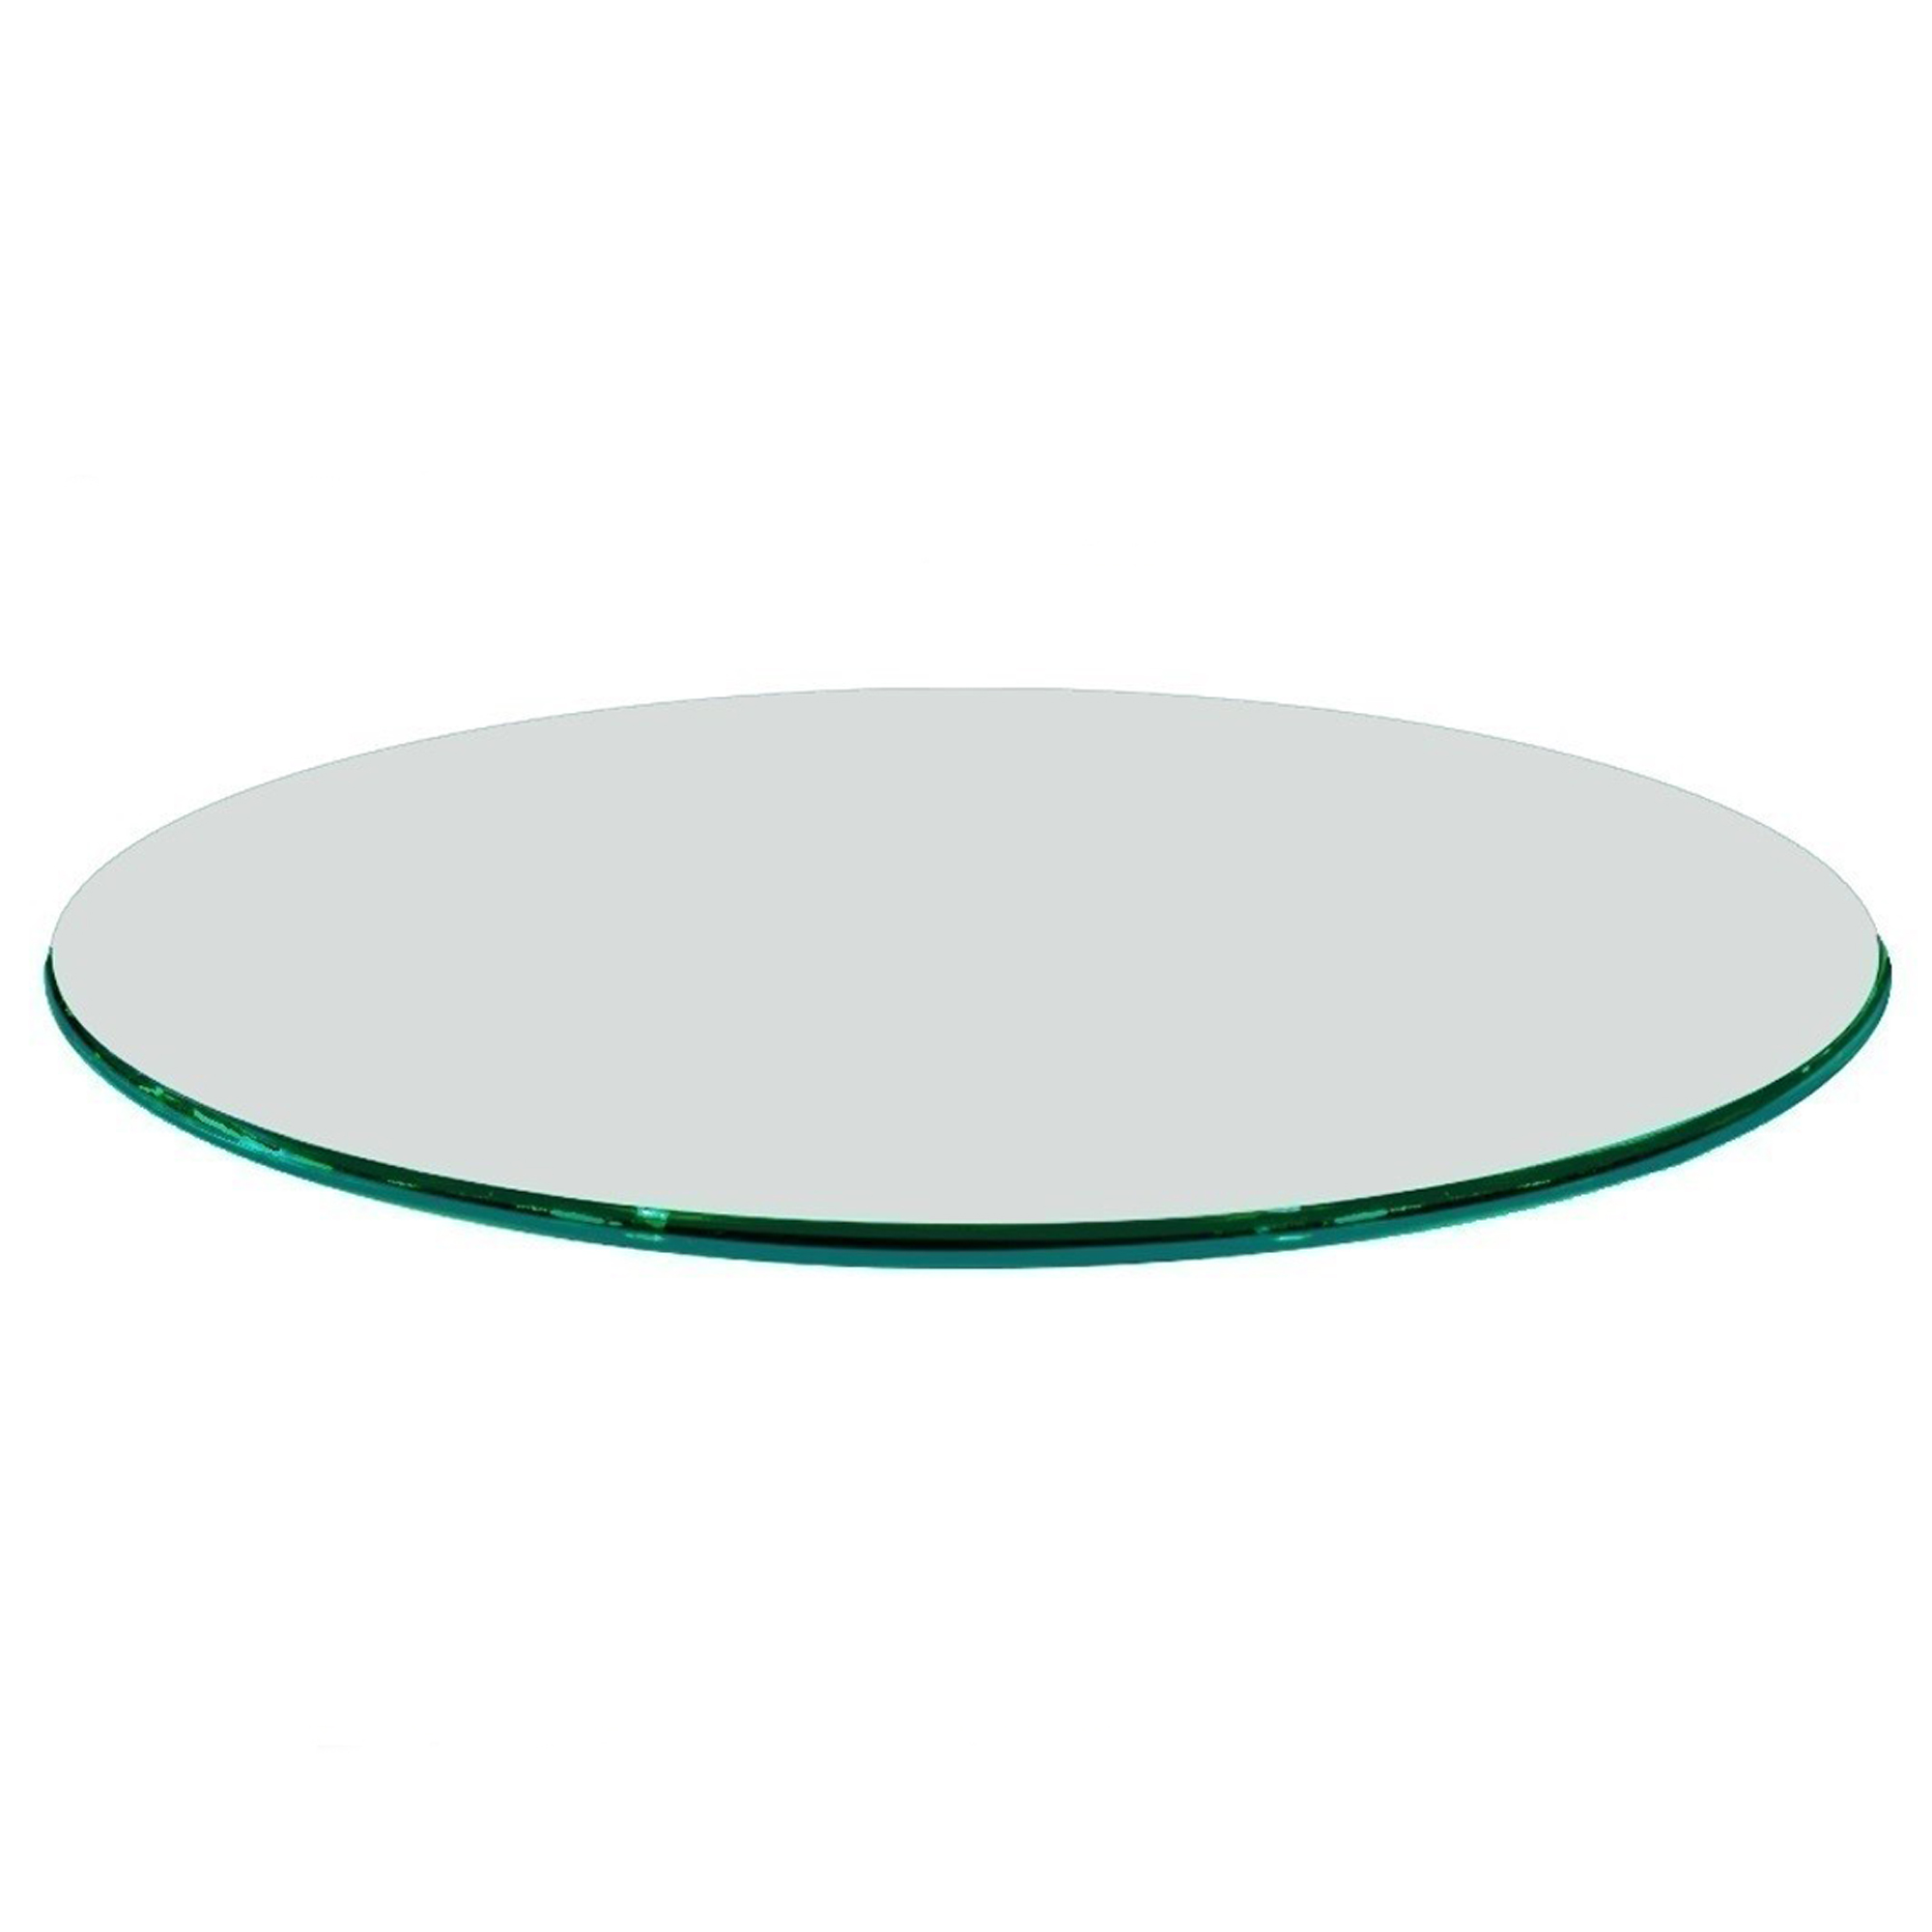 Round Patio Glass Table Top Tempered Glass Table Top Replacement Premium Round Circular Plate Glass Thick Tempered Polished Edge Tempered Beveled Edge By Glass And Mirror Glass Table Top 